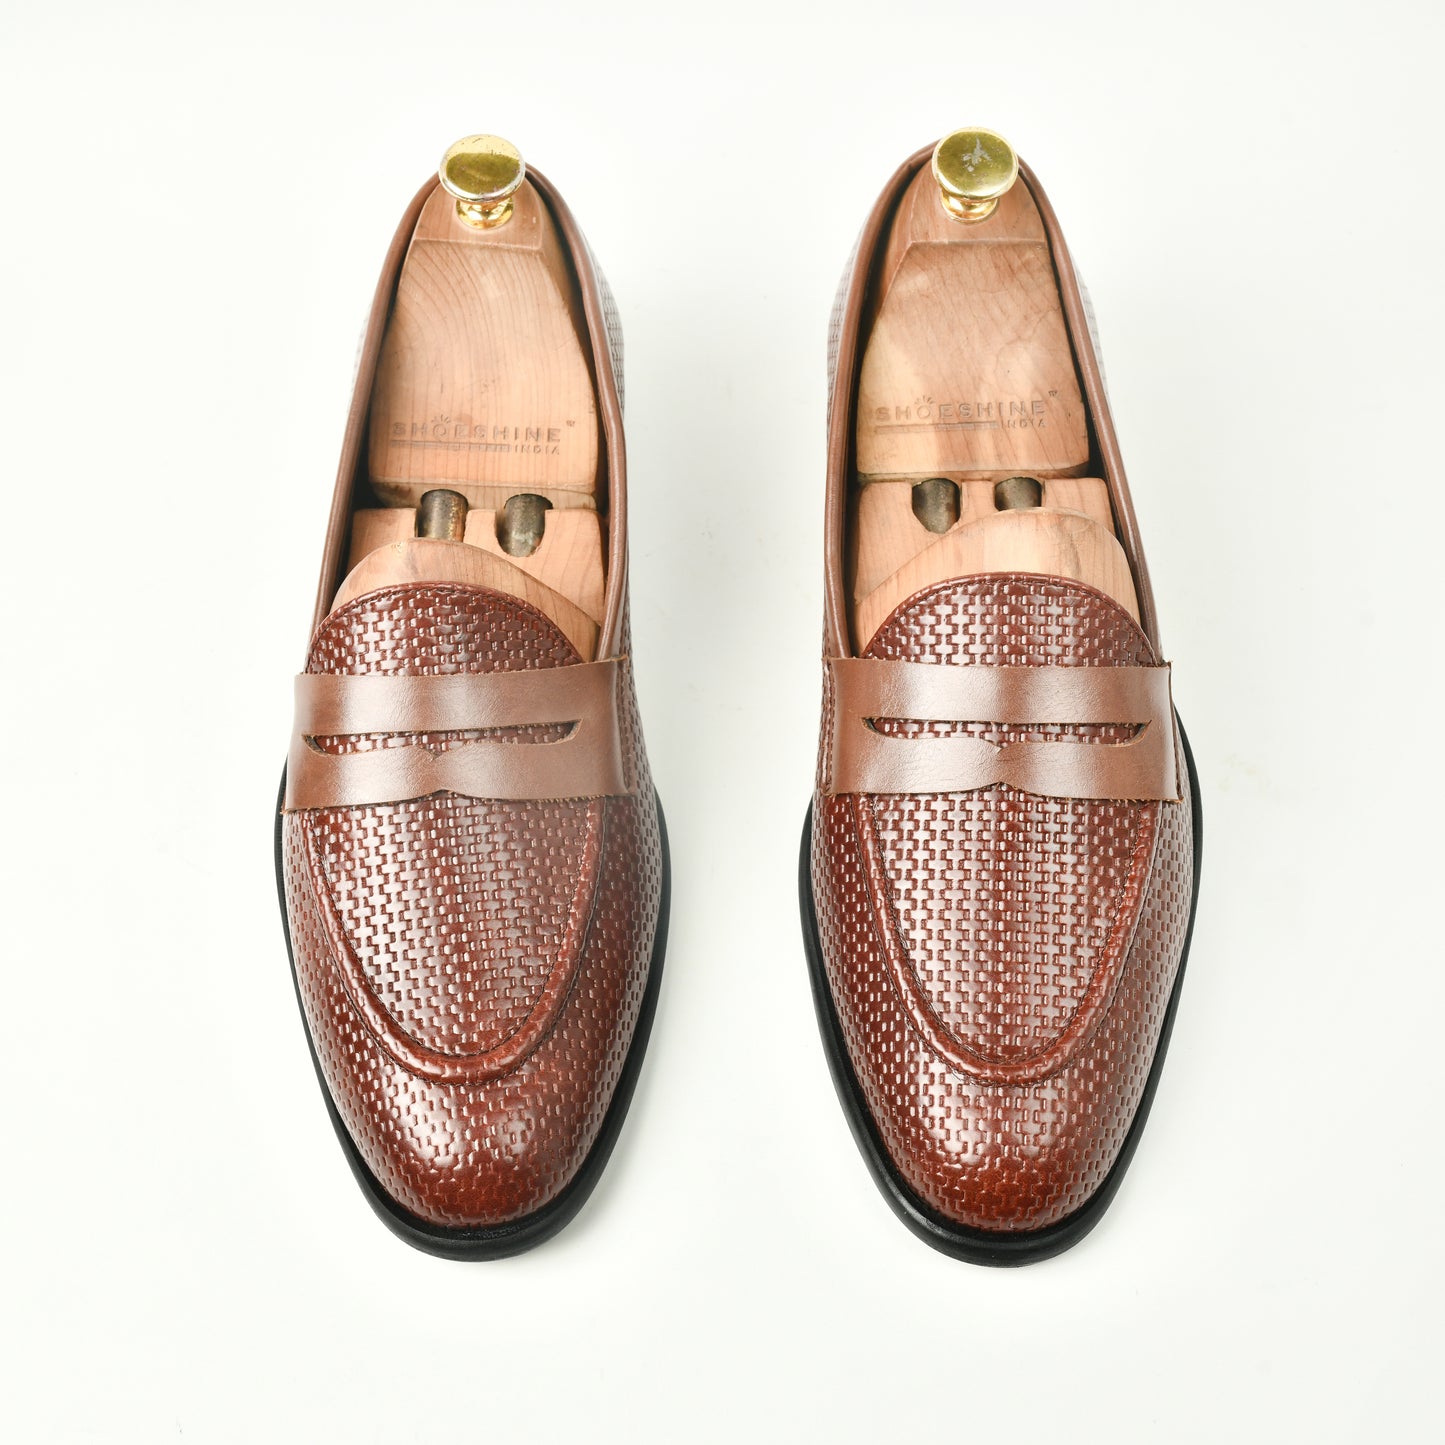 Woven Leather Slip Ons - Brown